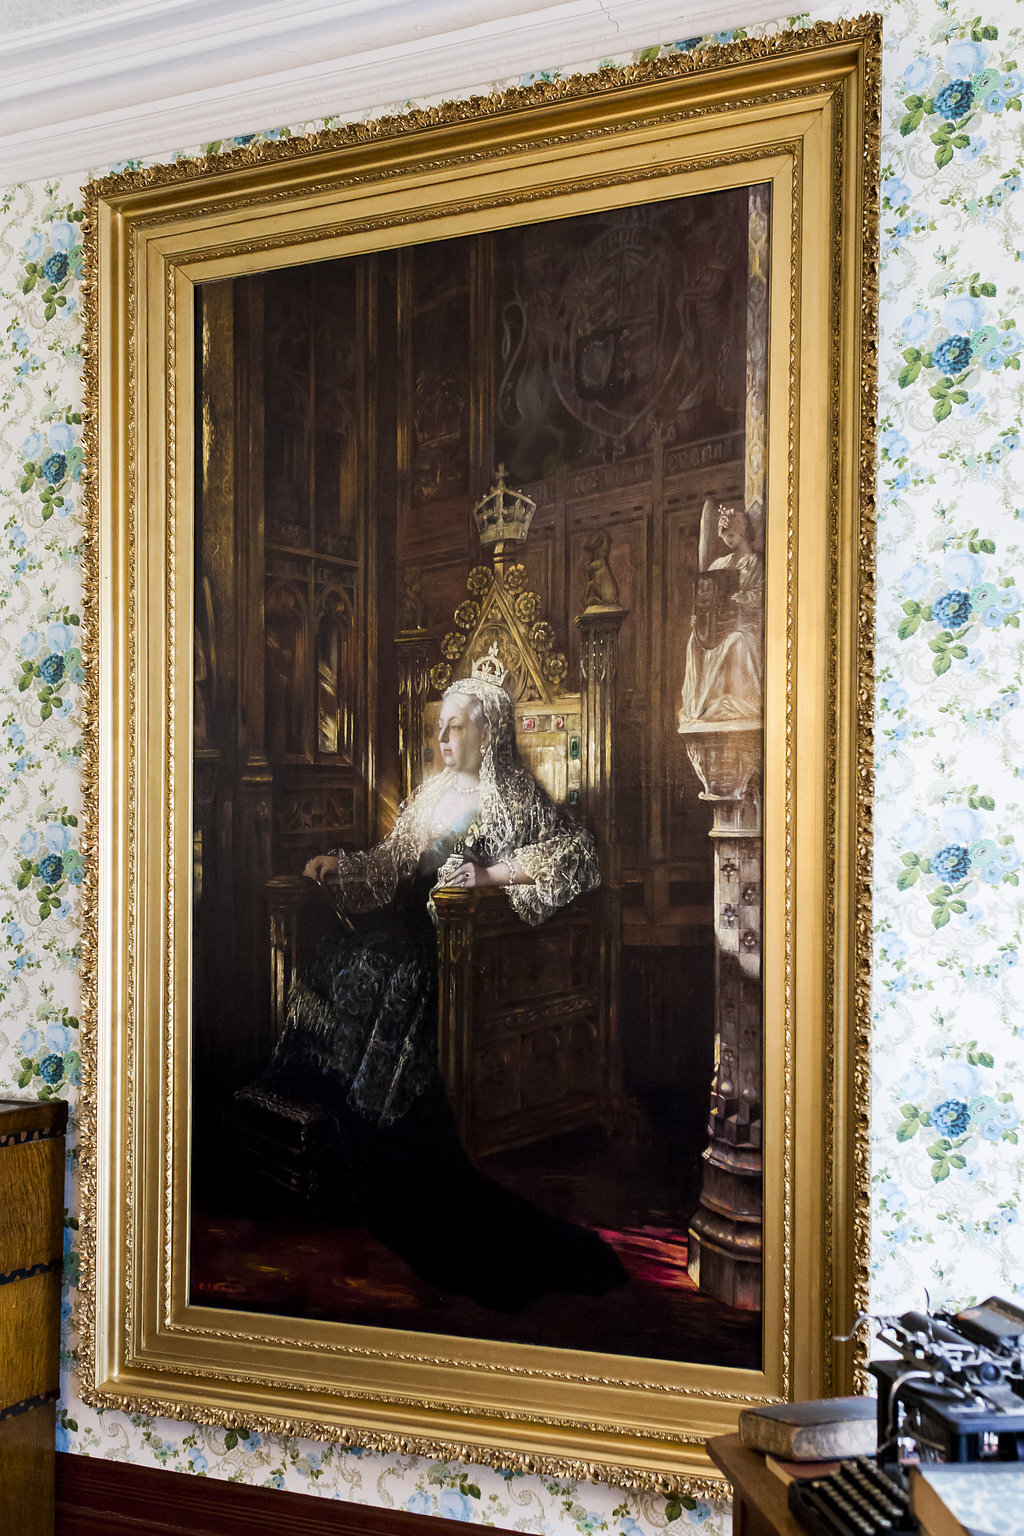 Queen Victoria portrait which hangs in the museum library at Government House SK